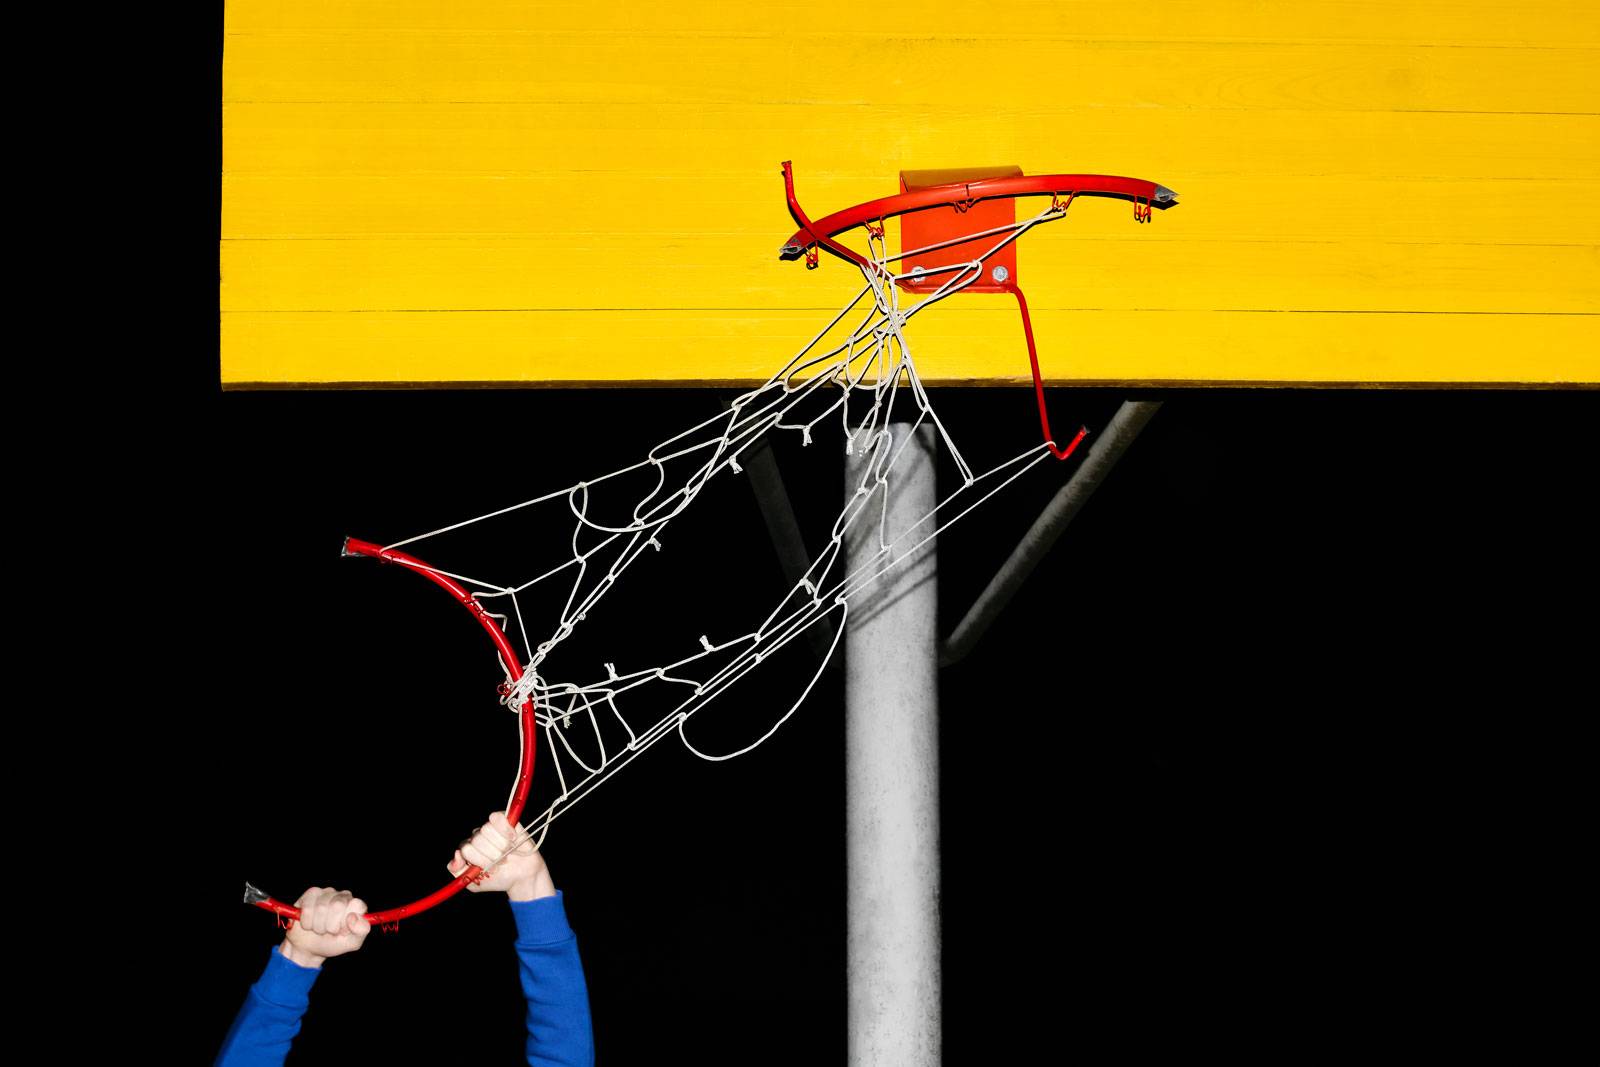 Hands holding a broken basketball hoop at night. Bad game. Hooliganism. The combination of yellow red and blue on a dark background